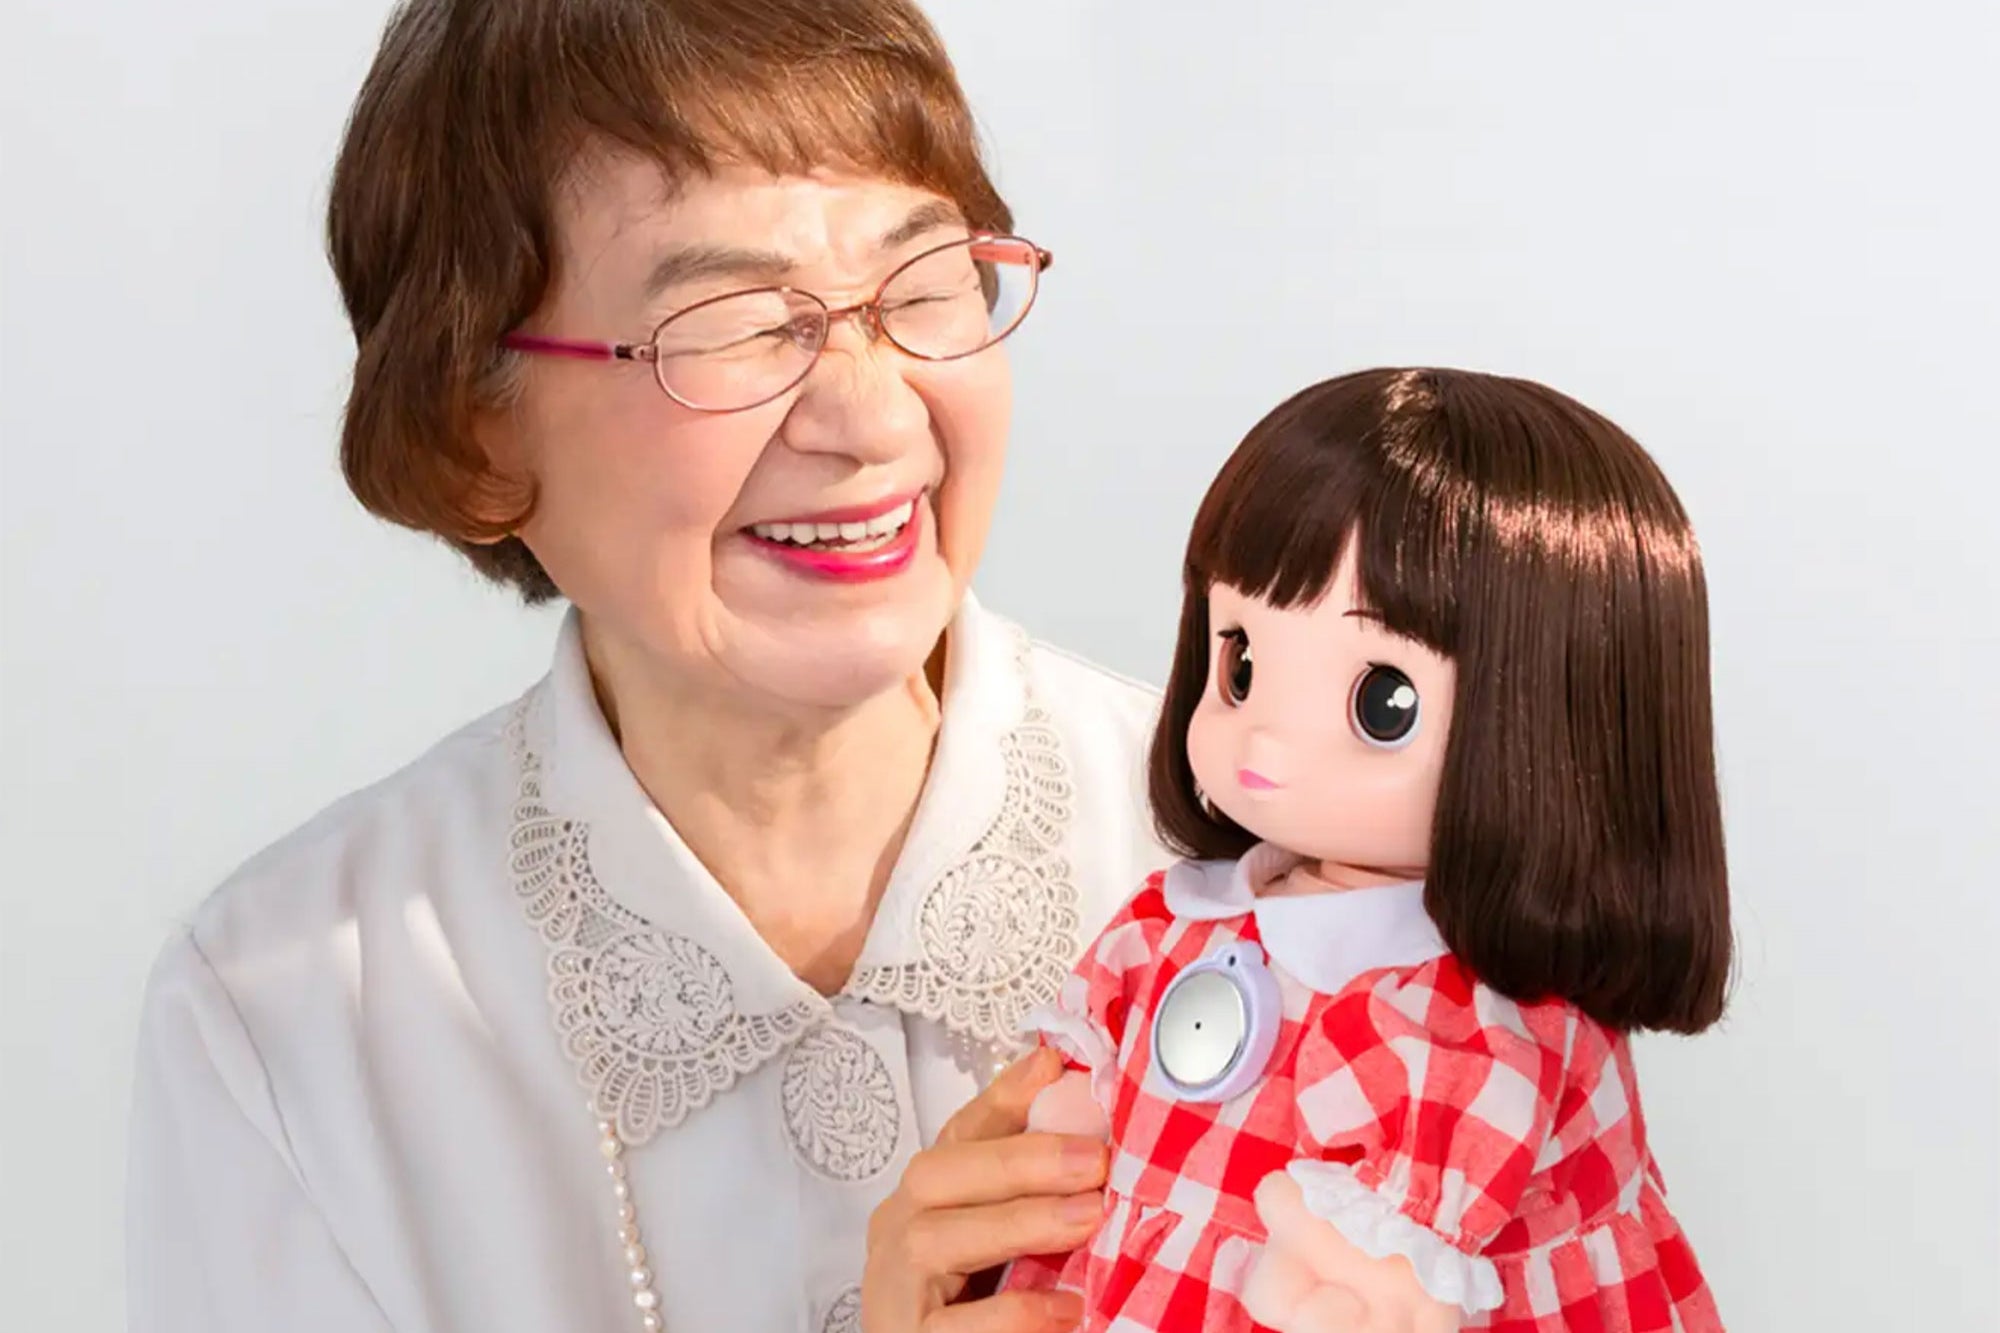 Ami-Chan, the doll with artificial intelligence that accompanies the elderly in confinement